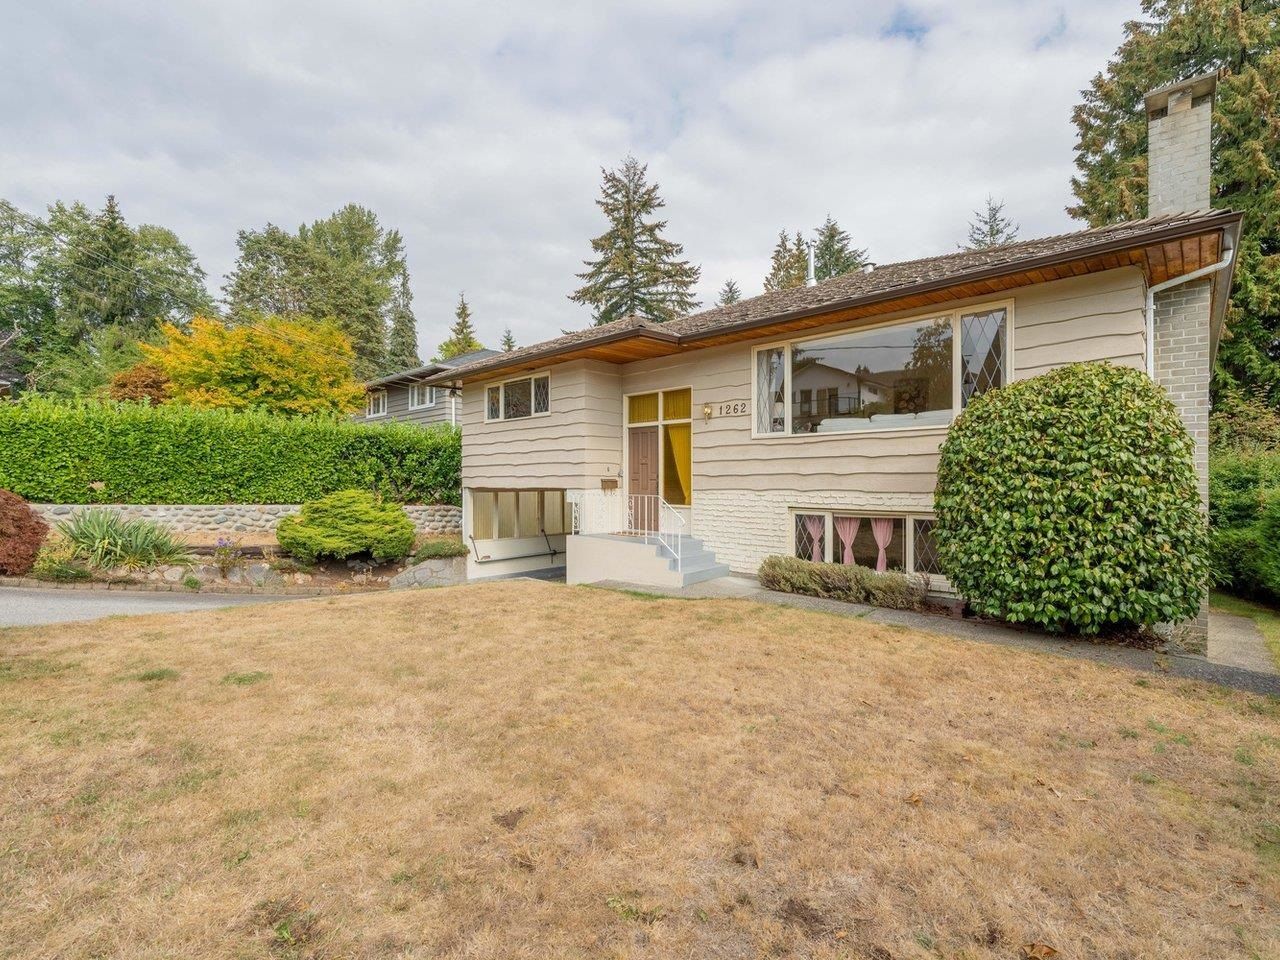 I have sold a property at 1262 EASTVIEW RD in North Vancouver
